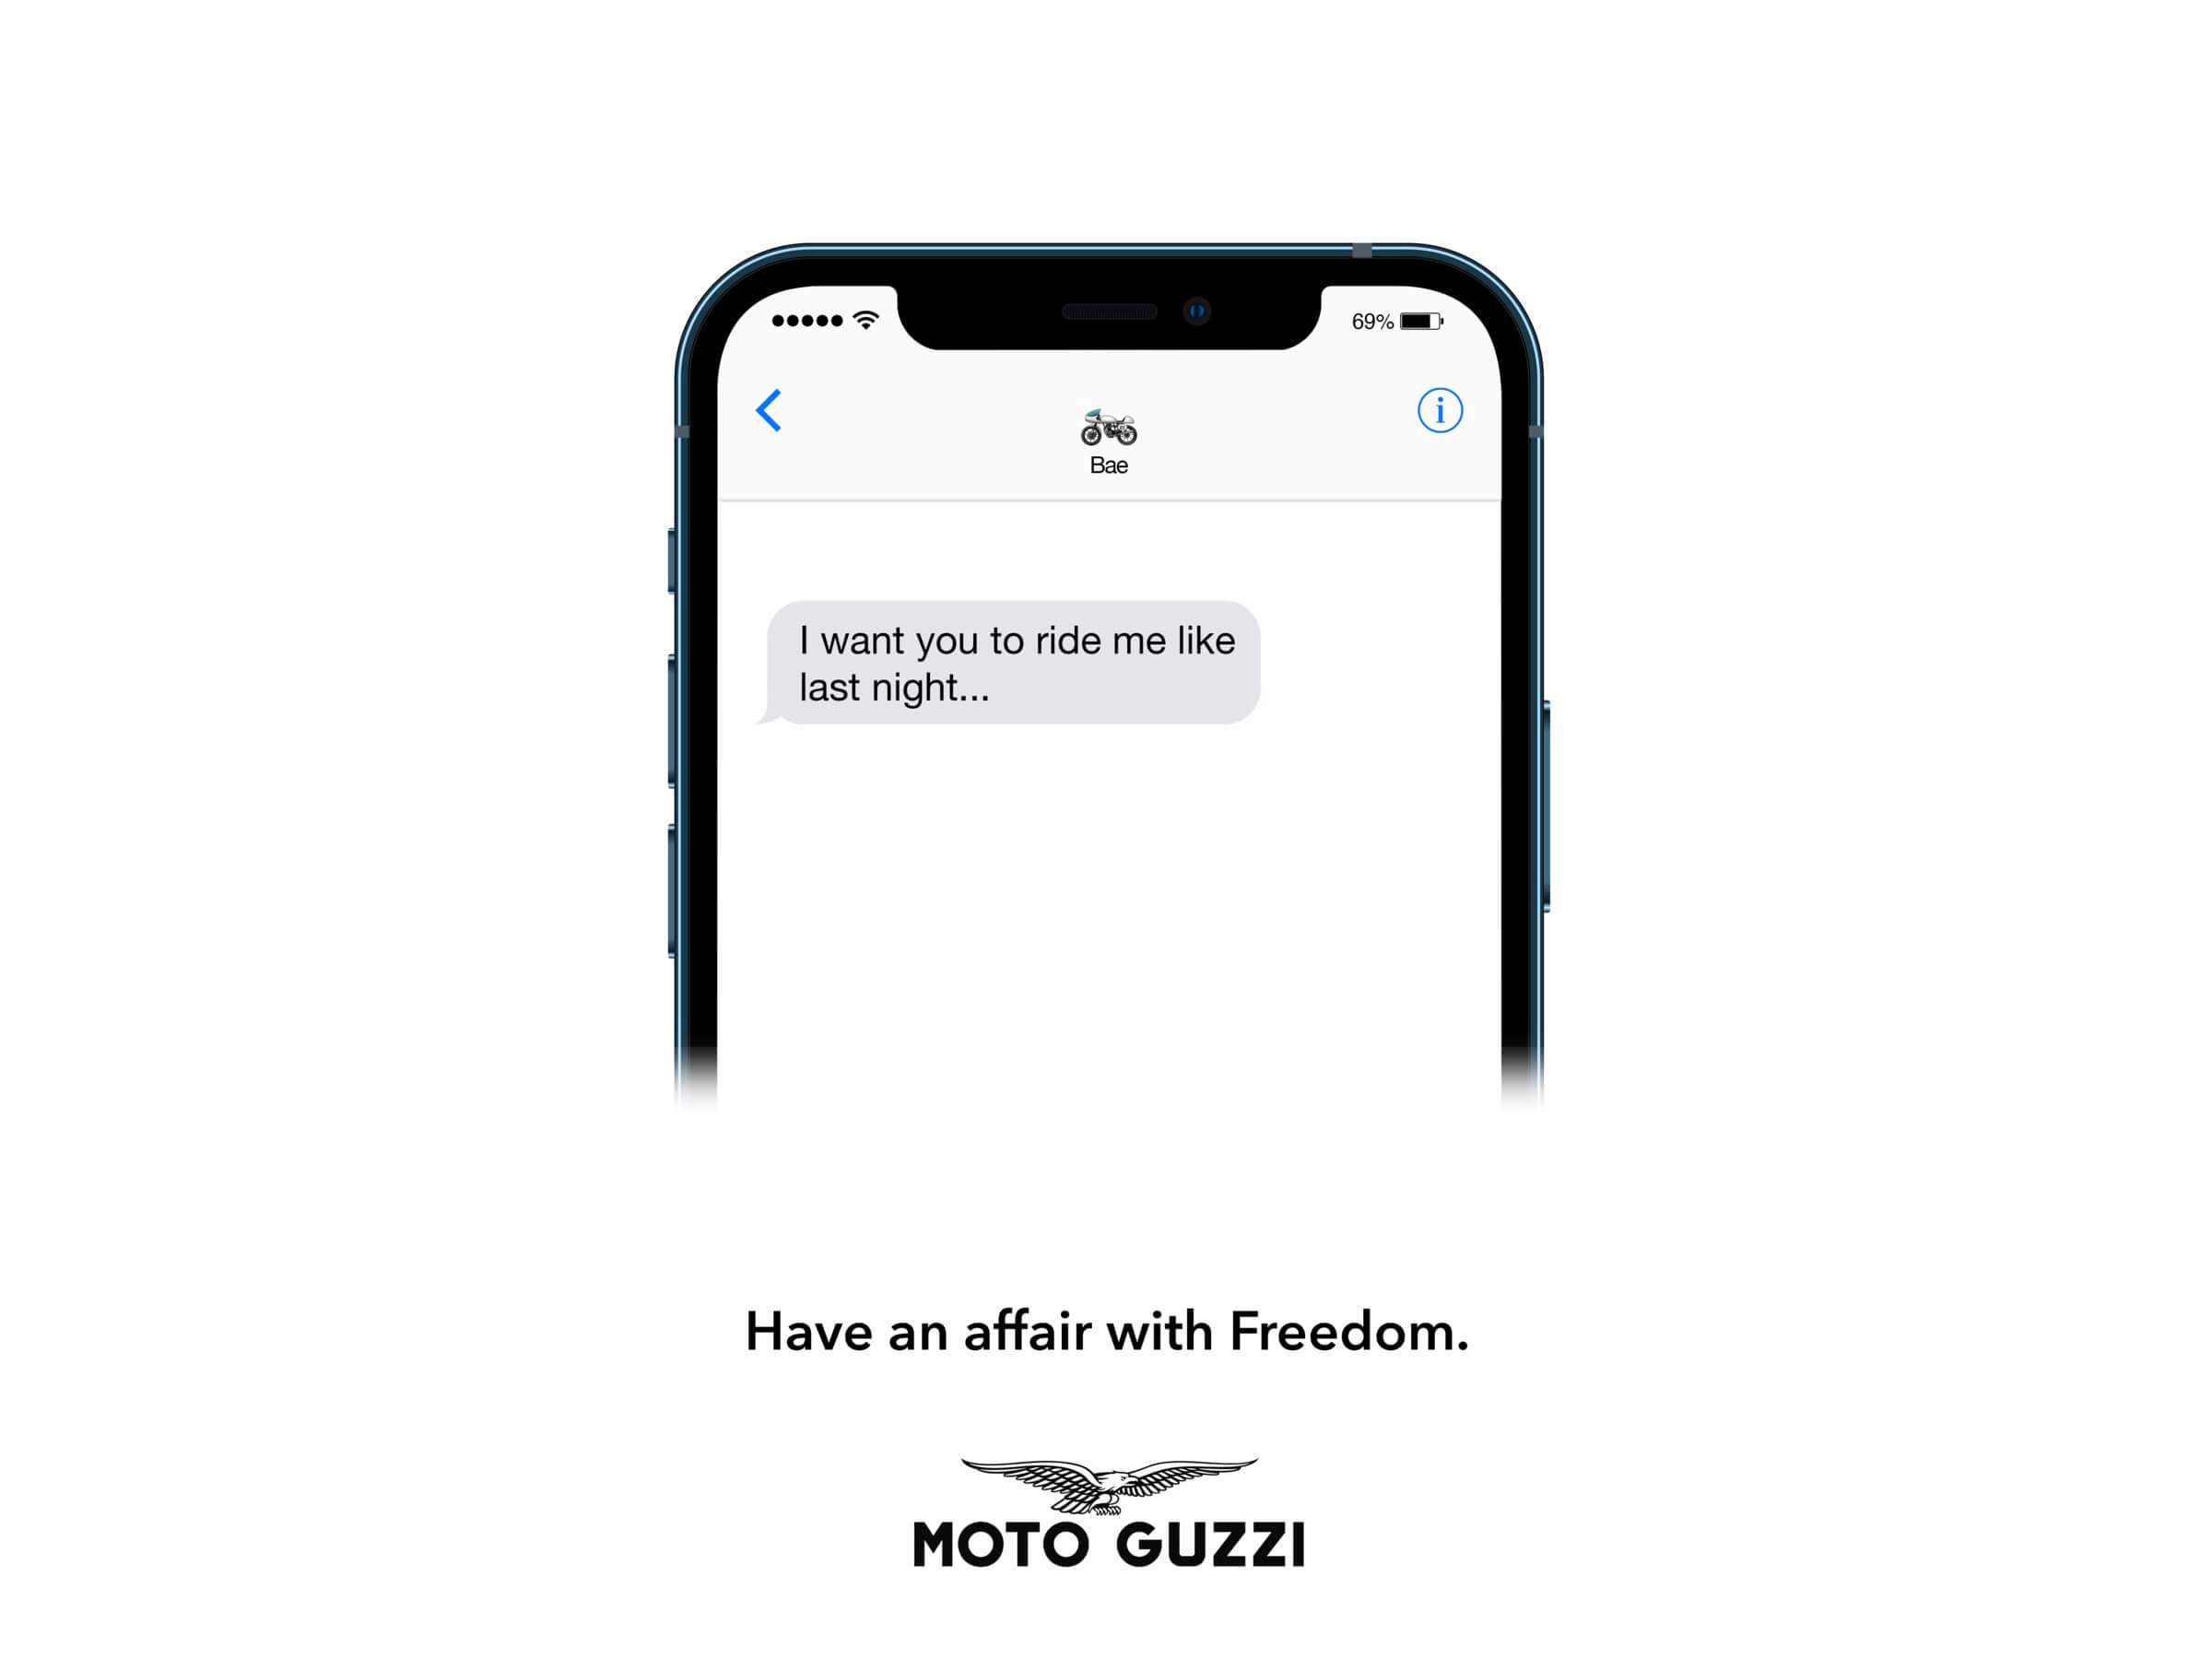 Moto Guzzi: Have an affair with Freedom